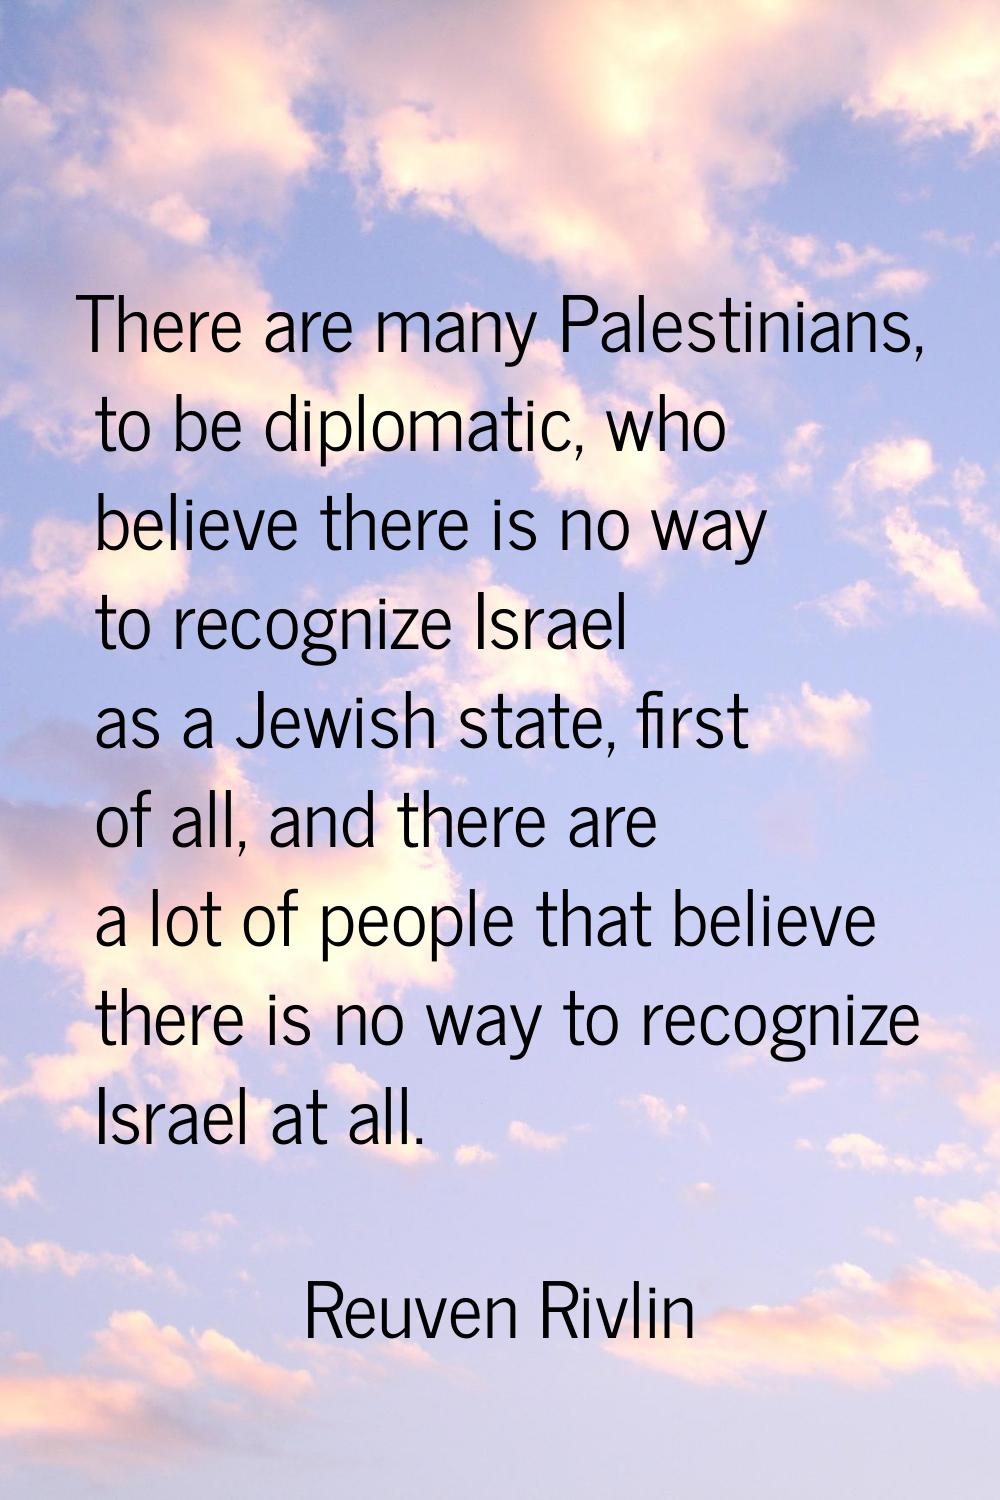 There are many Palestinians, to be diplomatic, who believe there is no way to recognize Israel as a